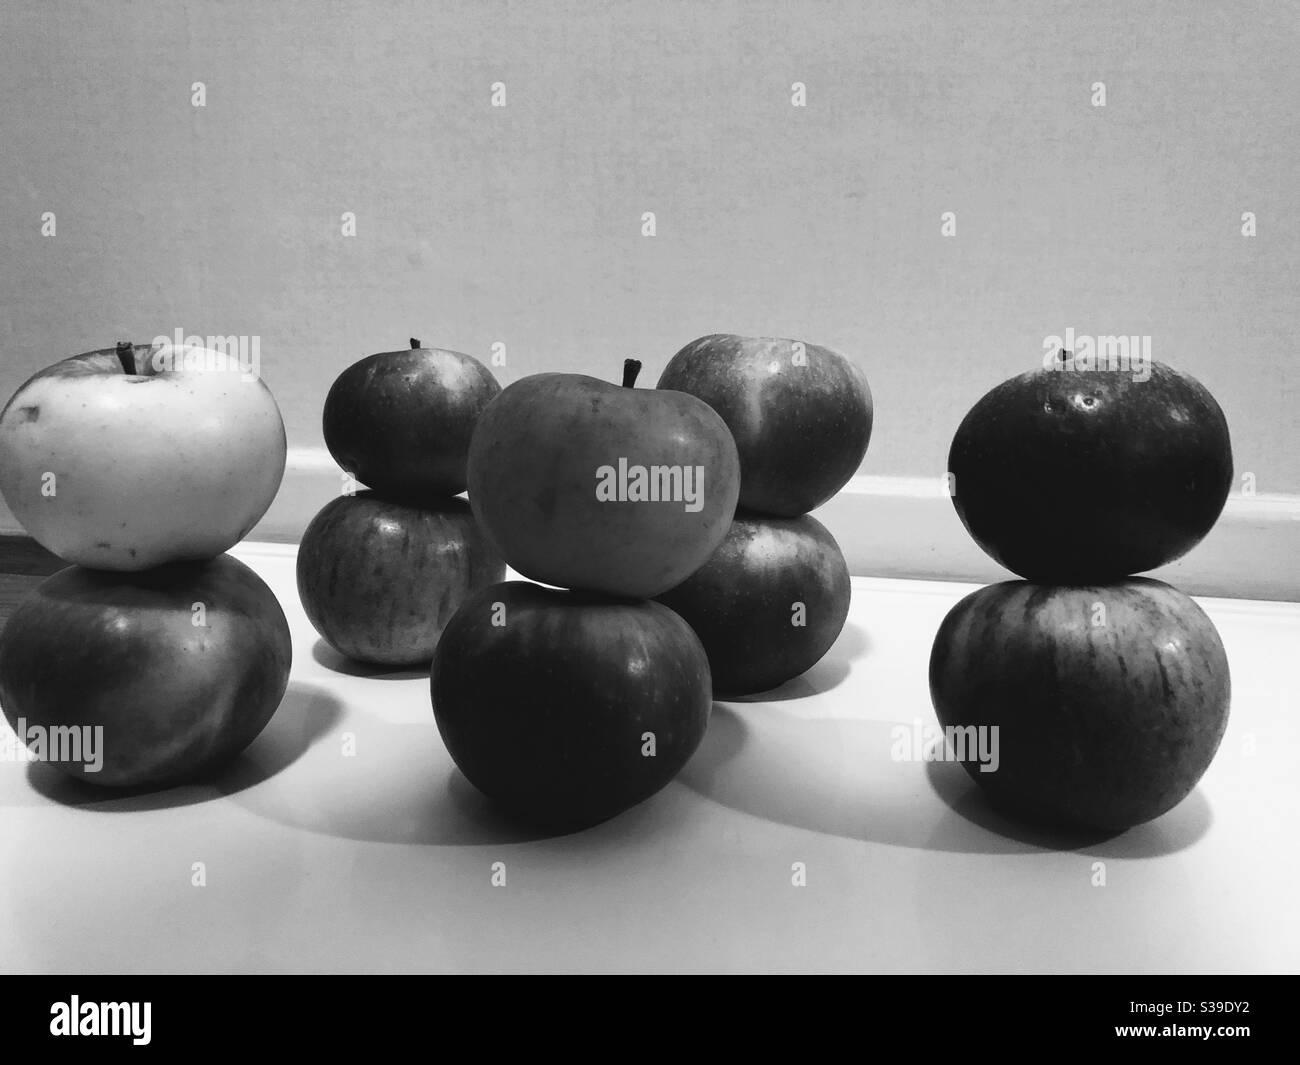 Allergy friendly apples in black and white. Stock Photo